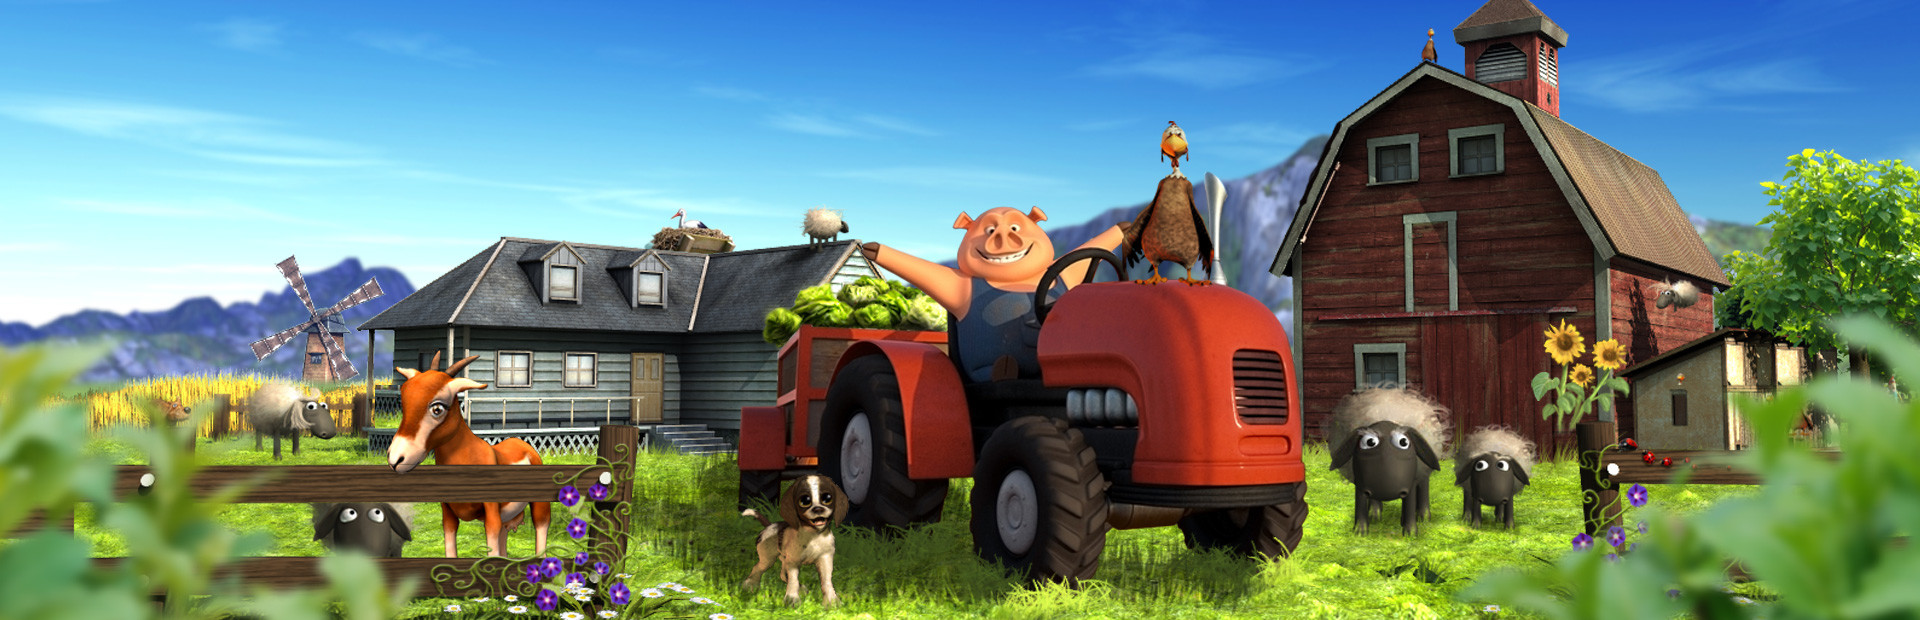 My Free Farm cover image